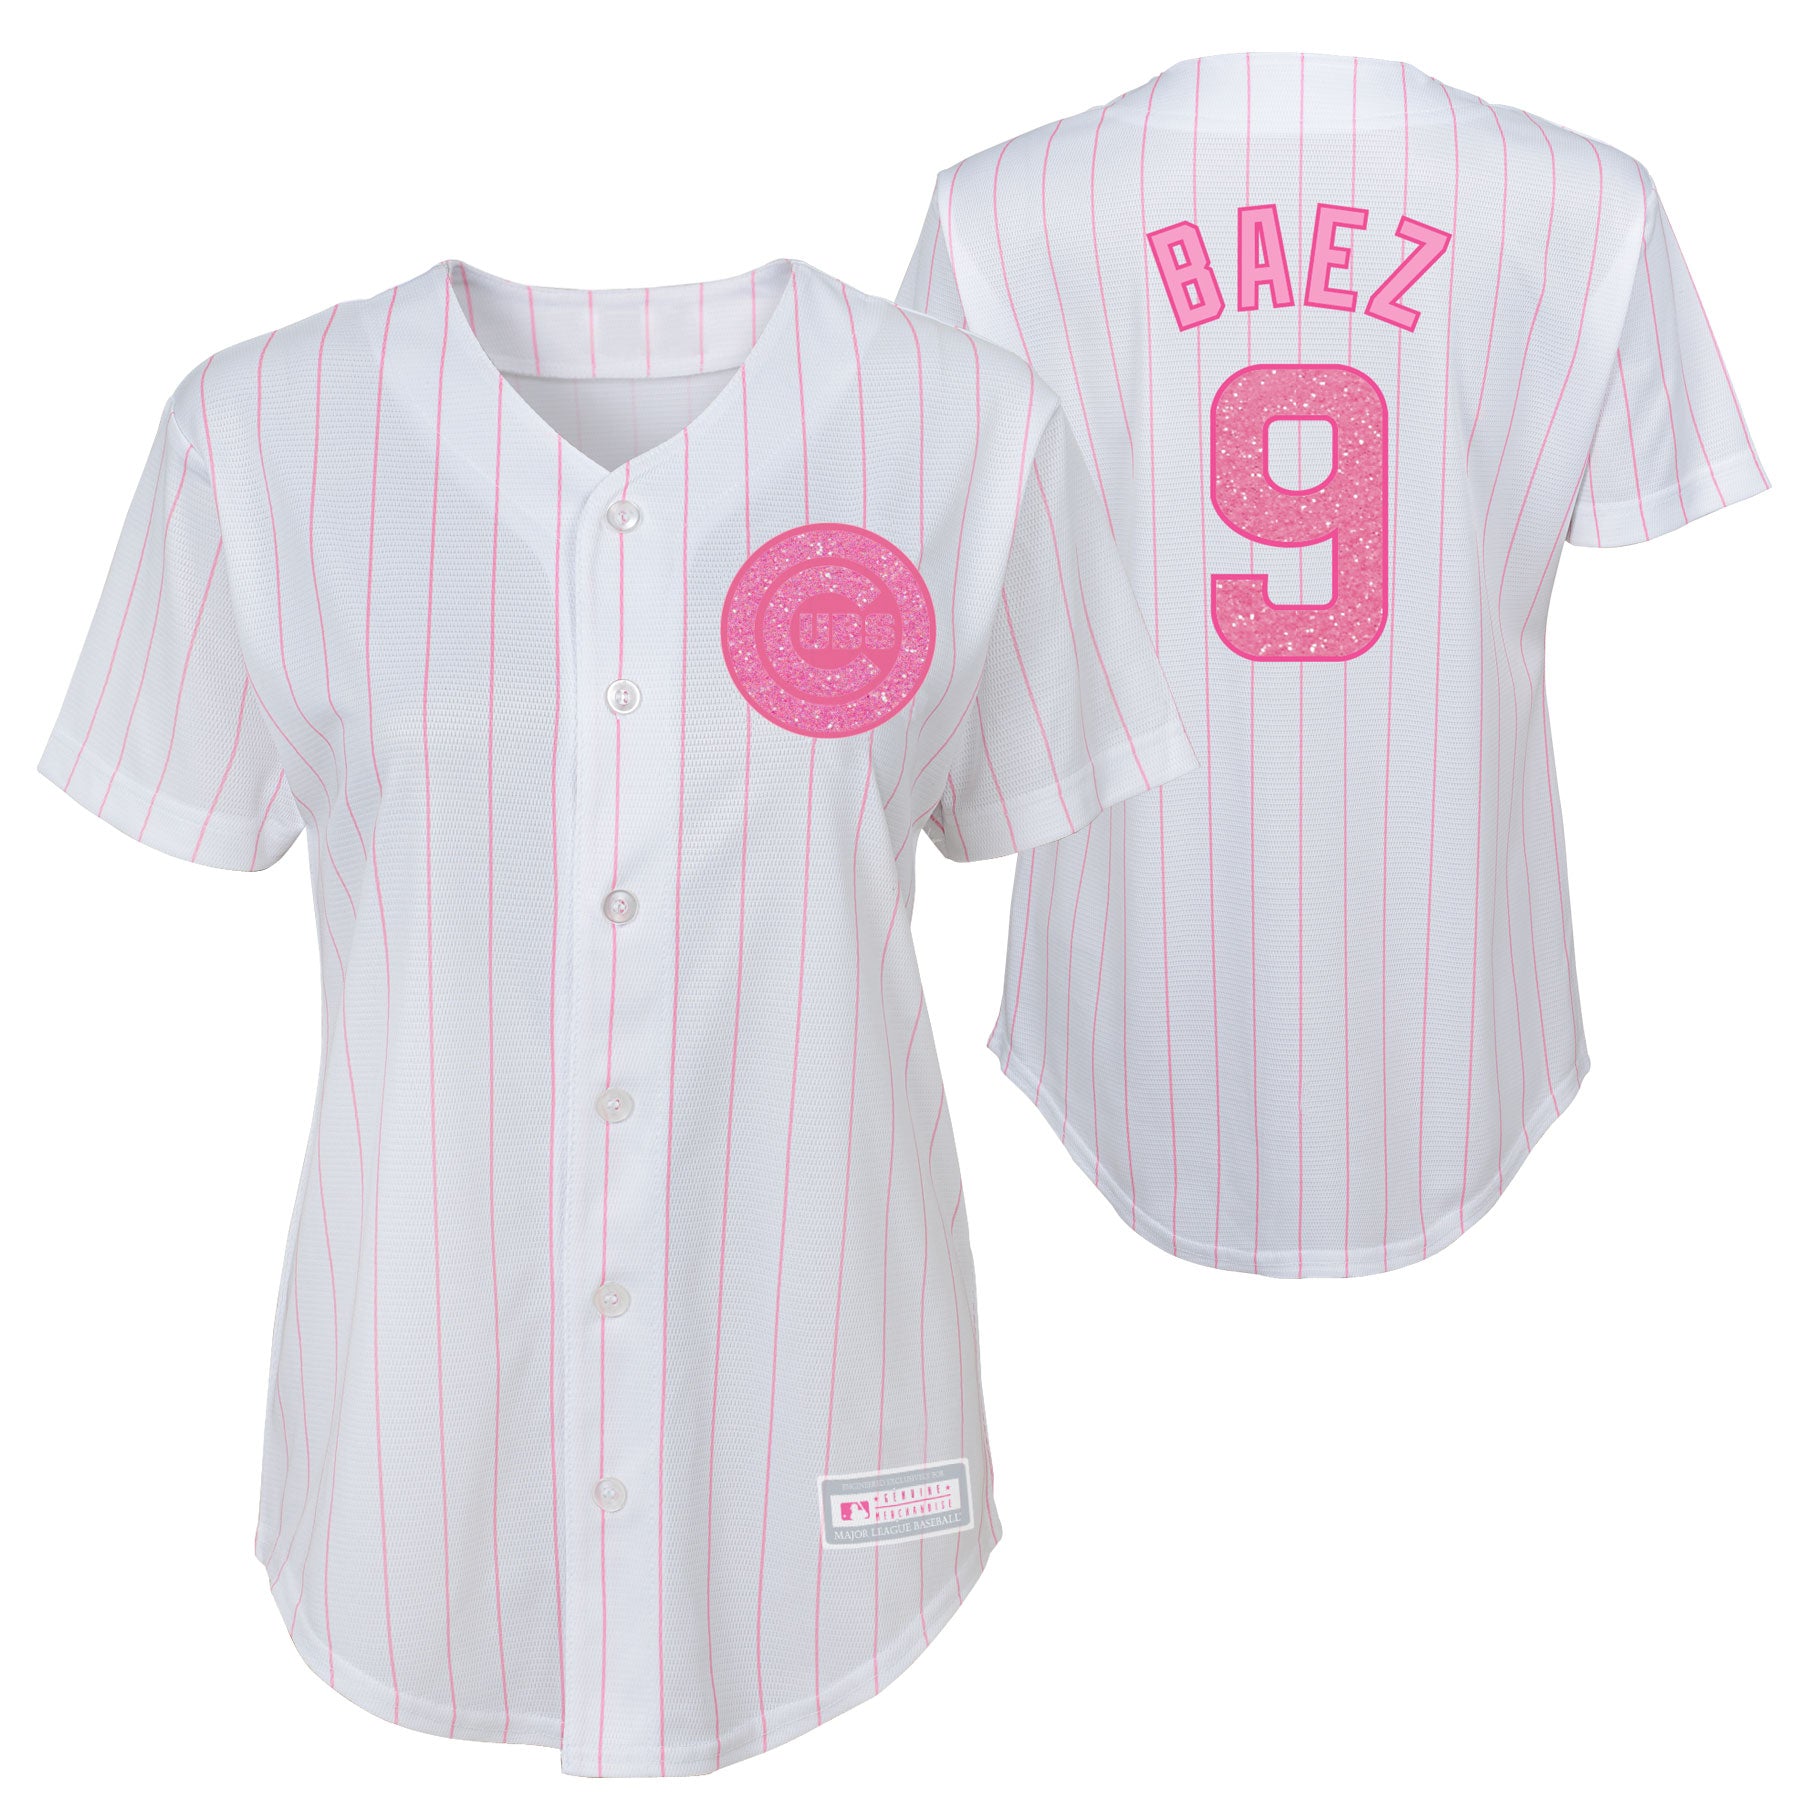 chicago cubs youth jersey